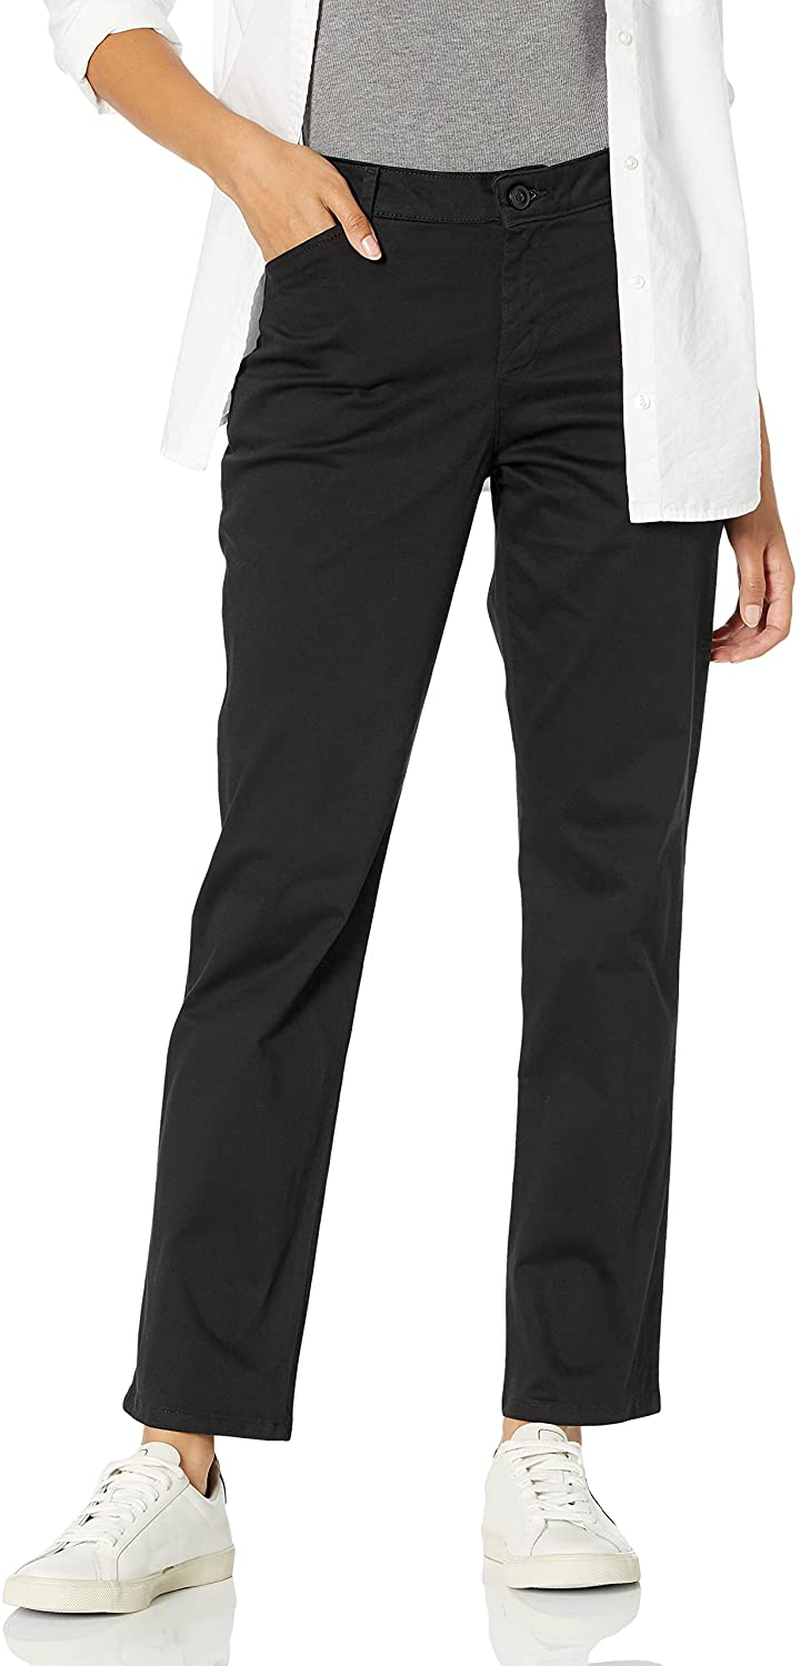 LEE Women’s Petite Relaxed Fit All Day Straight Leg Pant